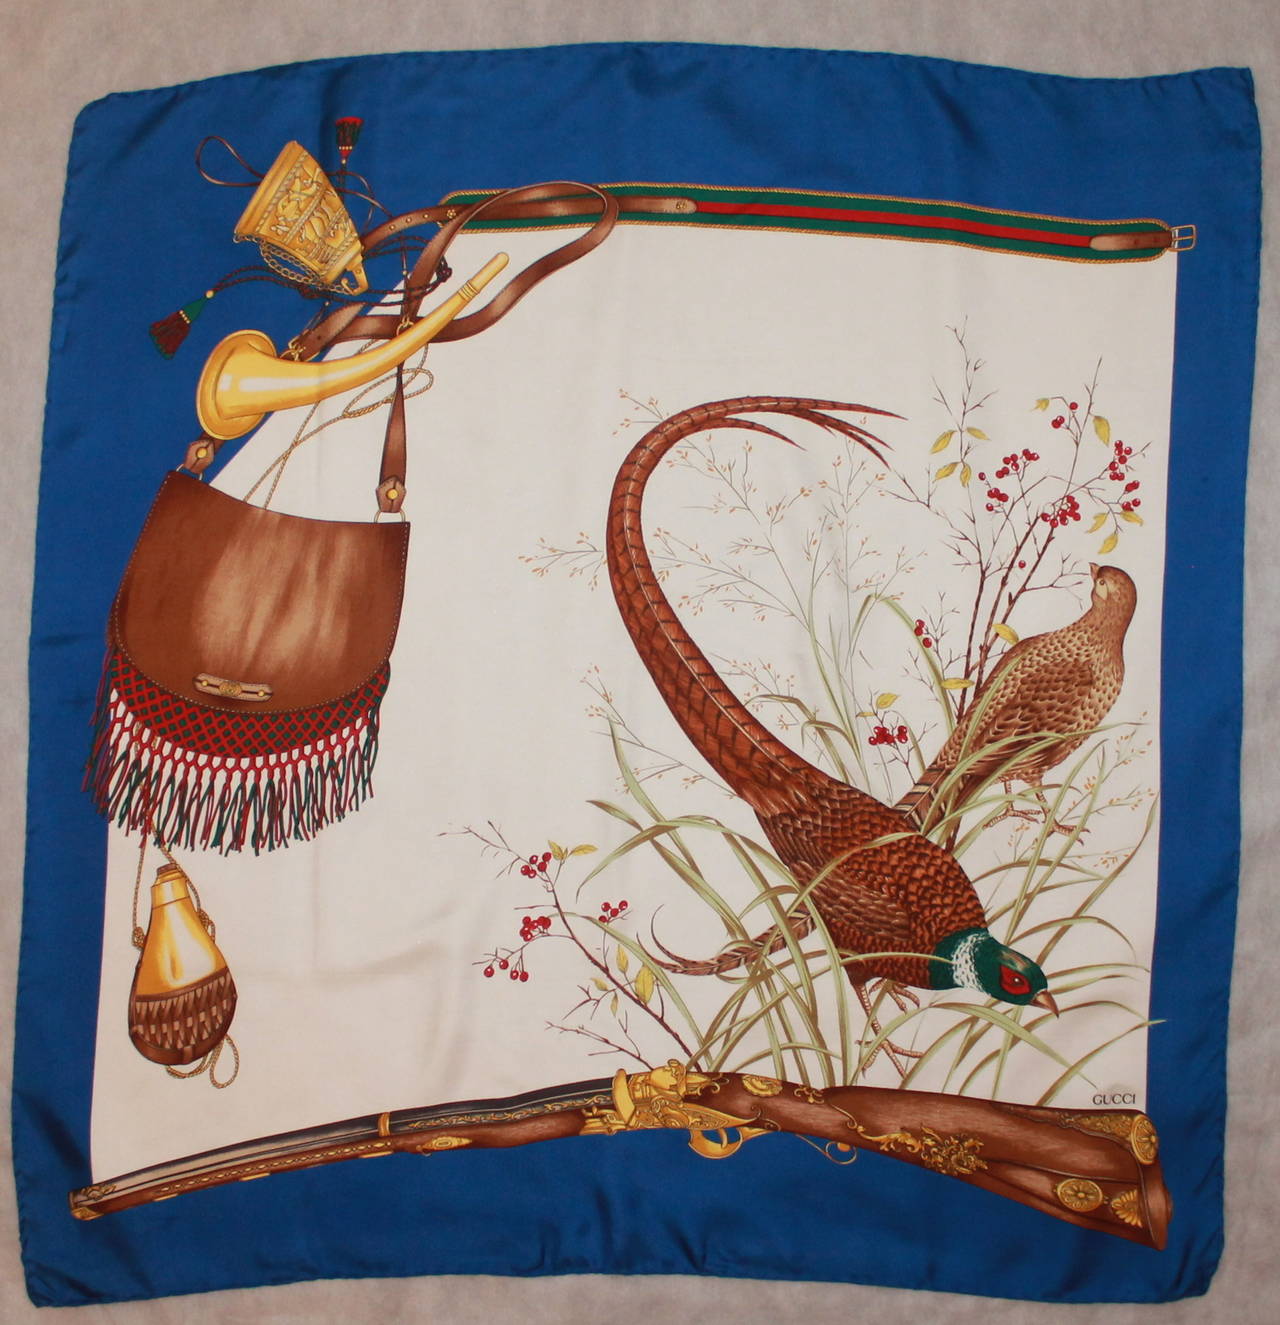 Gucci Hunting Large Printed Silk Scarf with Royal Blue Trim. This scarf is in excellent condition and has birds, a horn, and satchel on the print. 

Length- 34